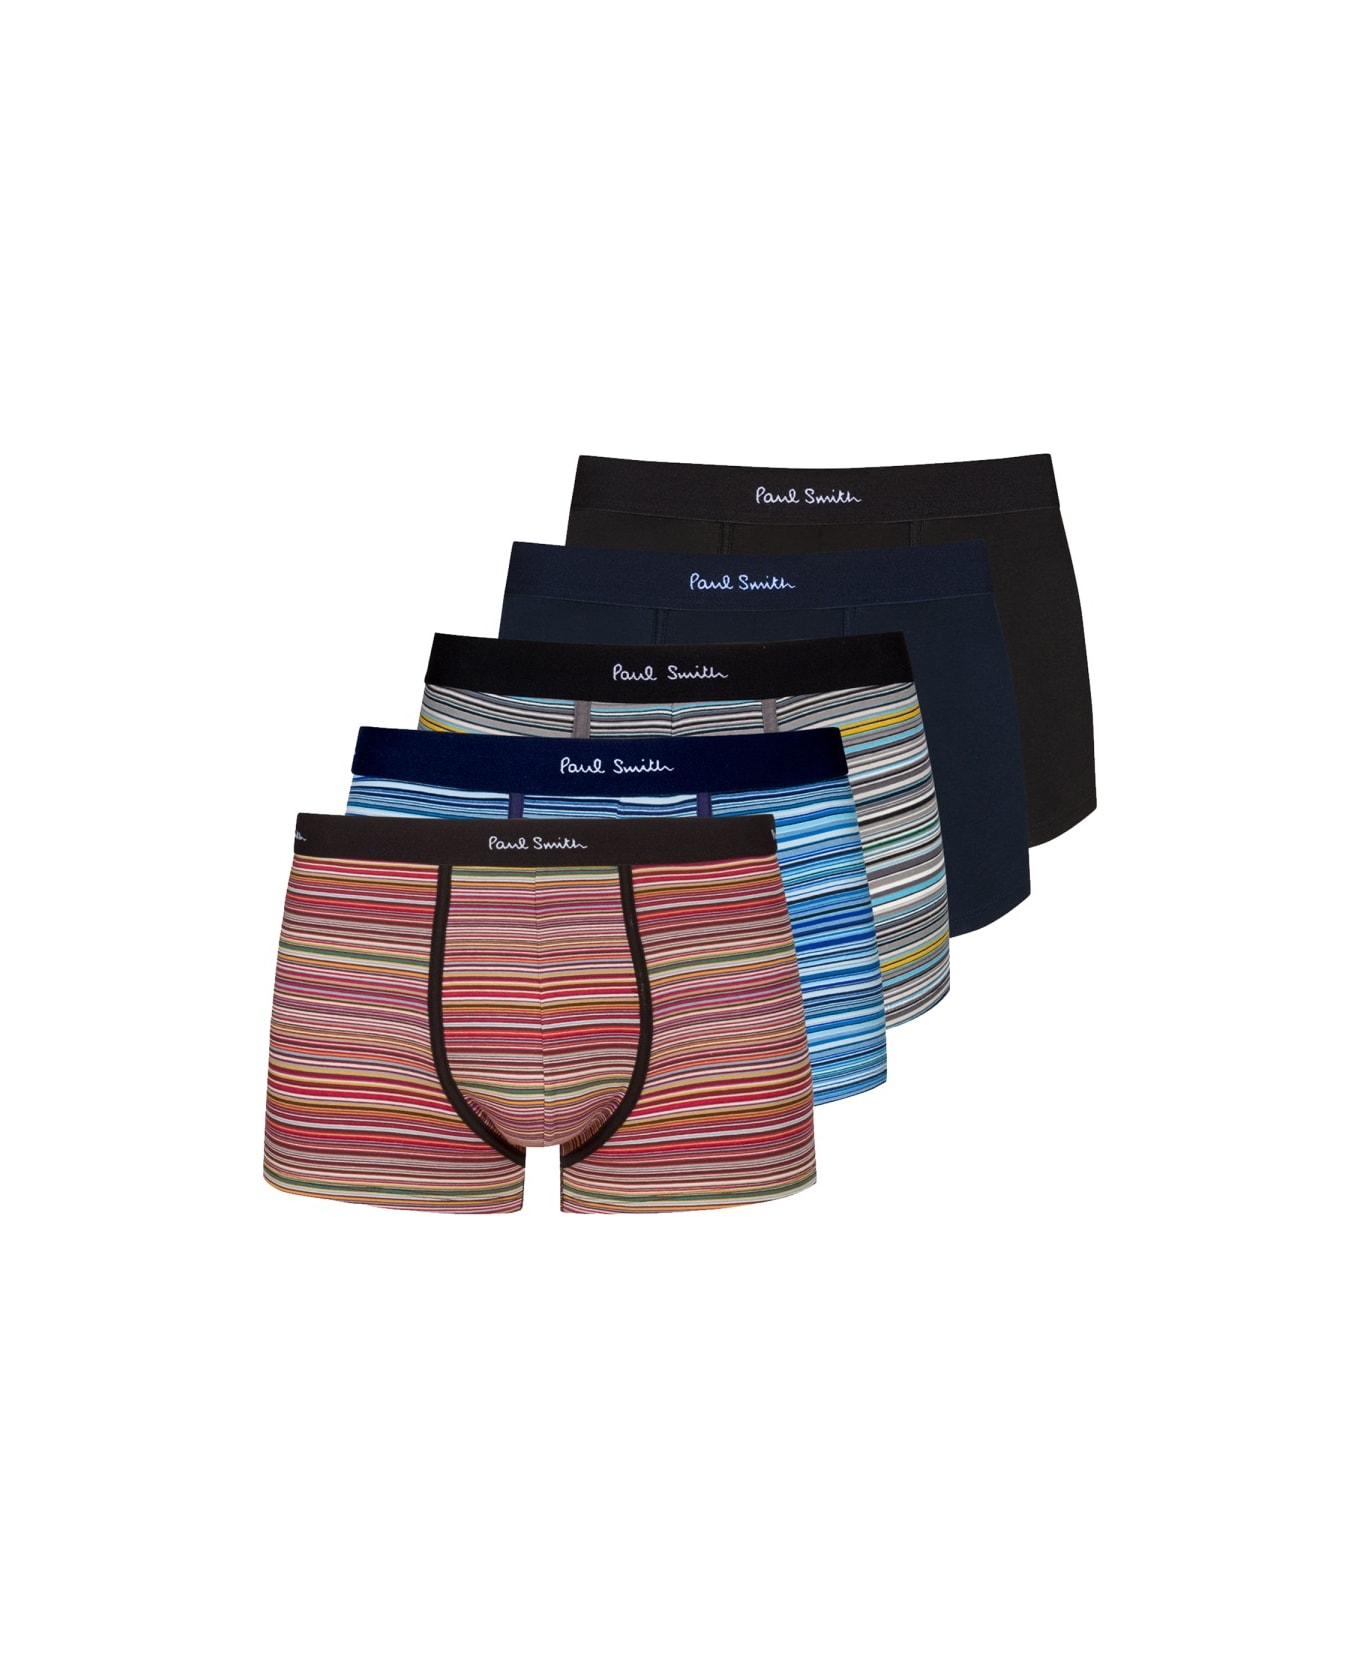 Paul Smith Pack Of Five Boxer Shorts - MULTICOLOUR